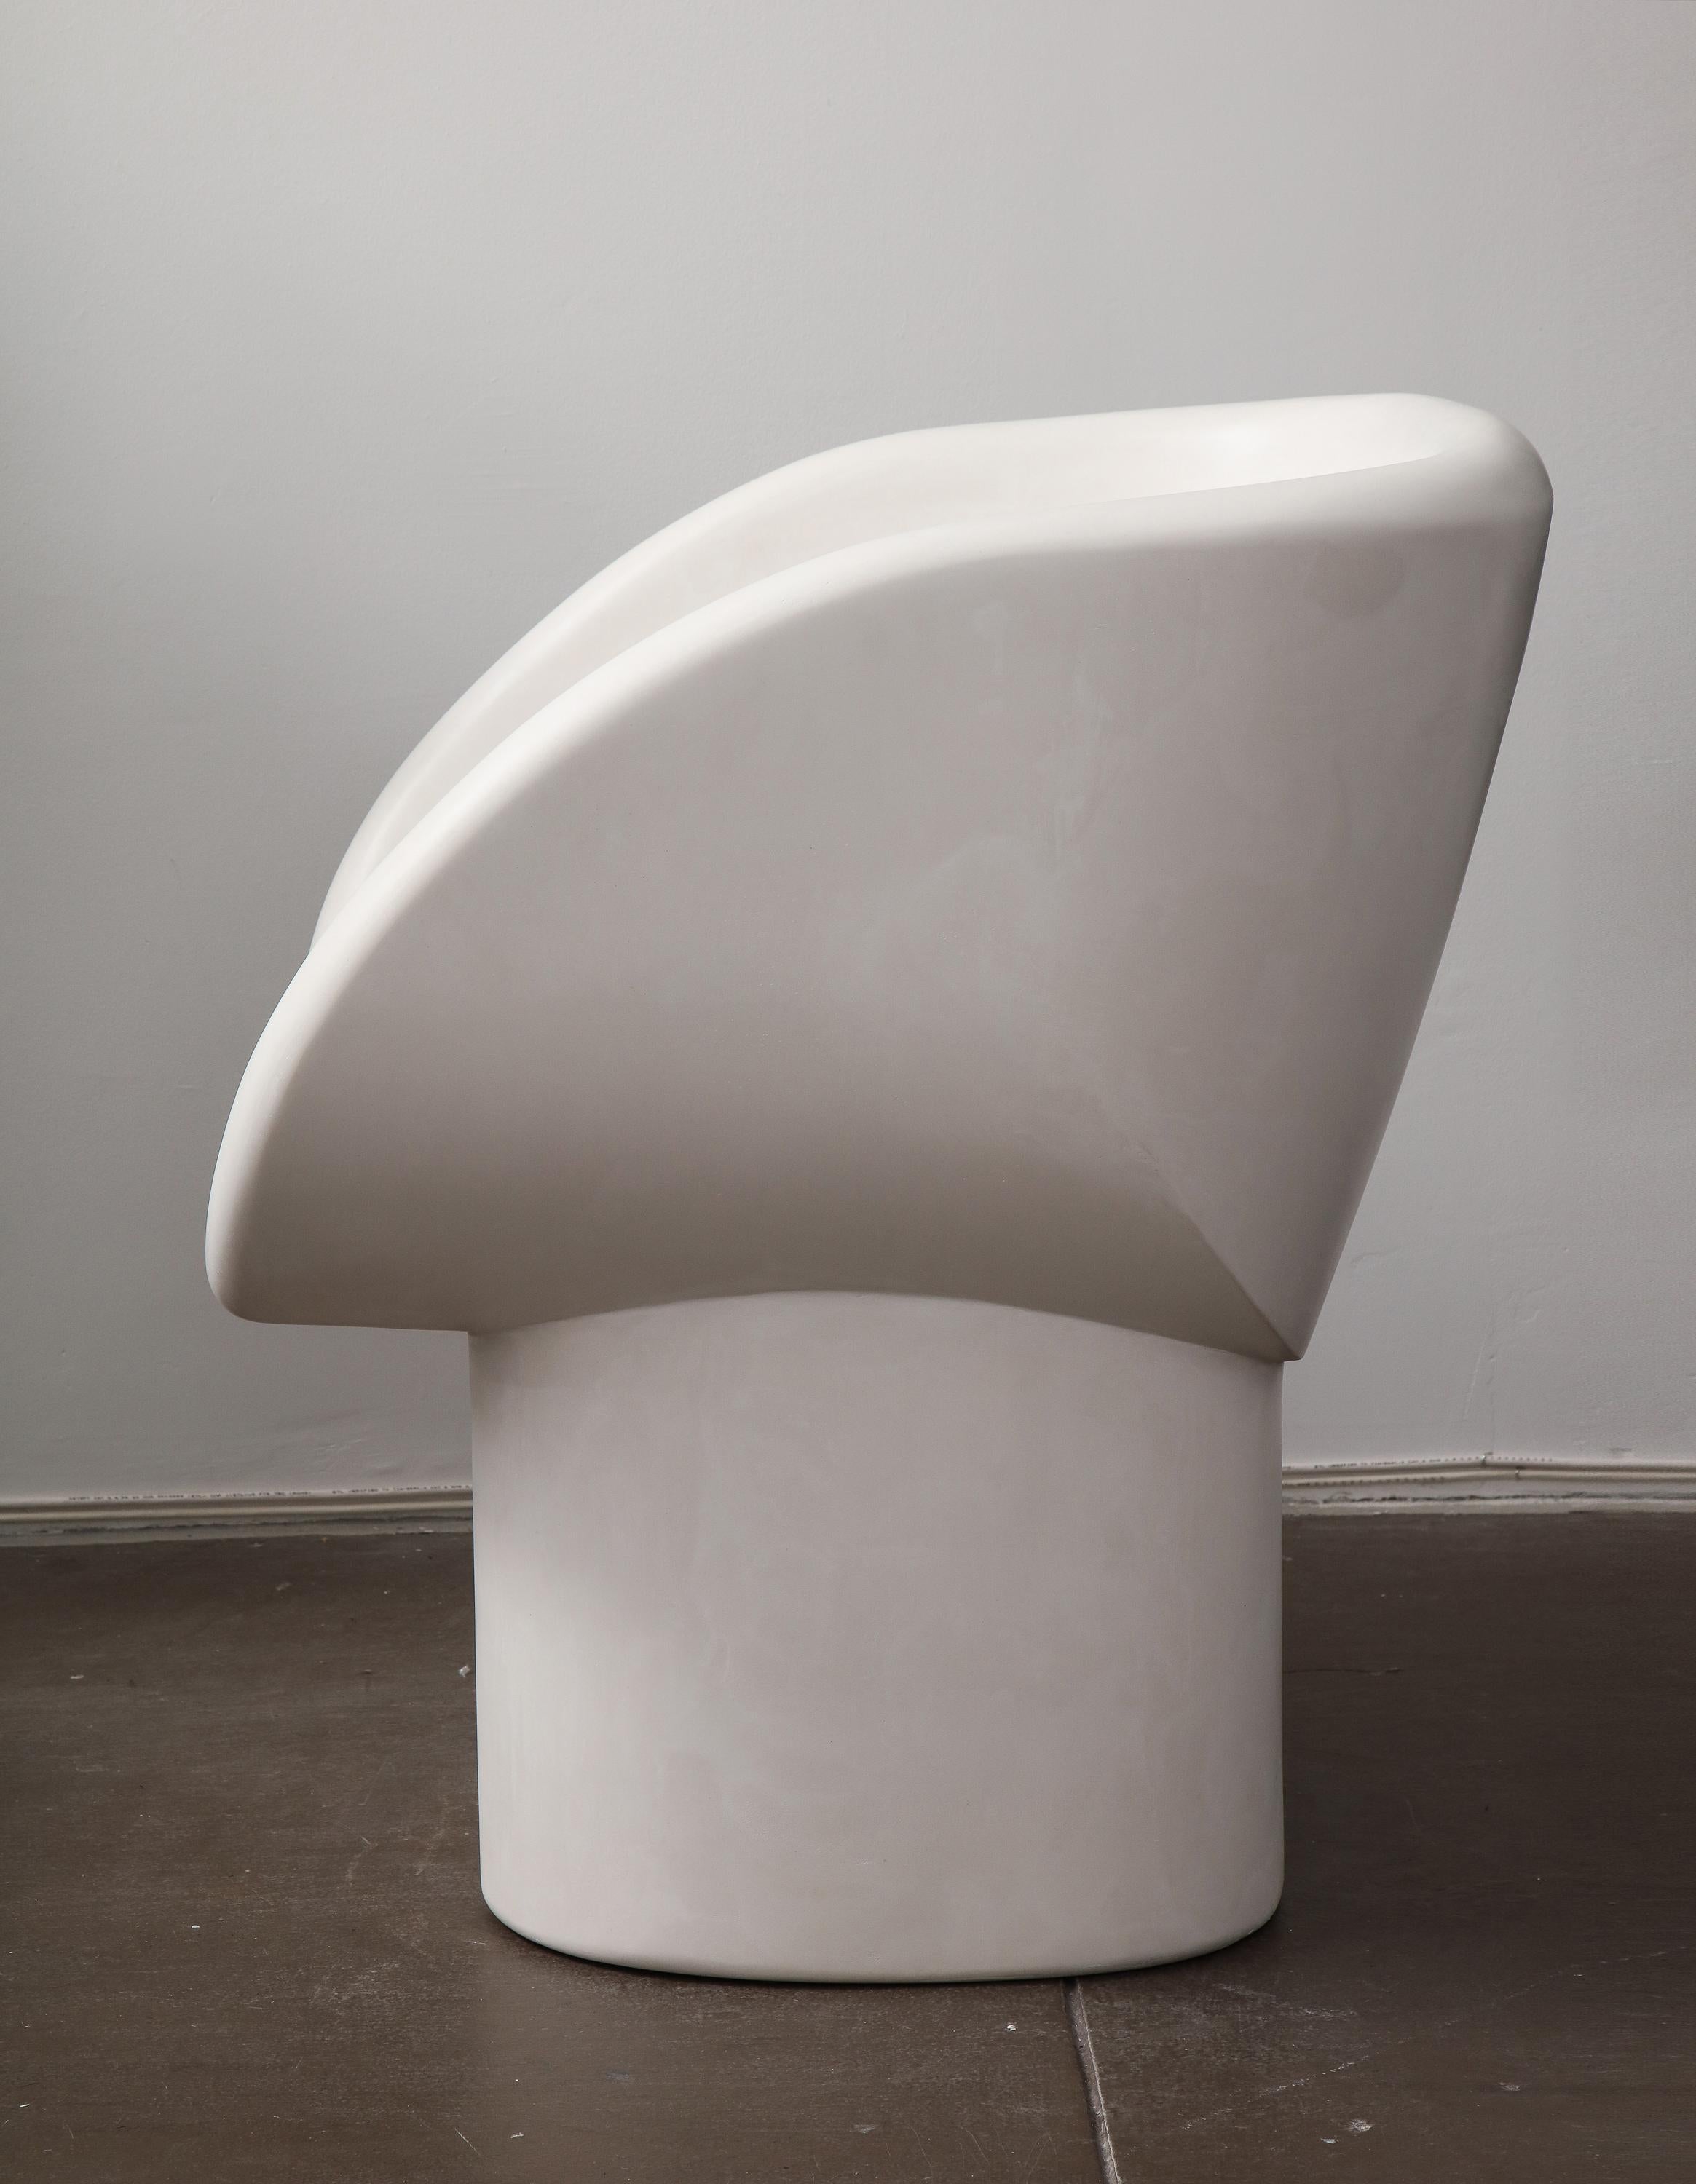 American Sometimes an 'Untitled' Chair in Gypsum Plaster by Reynold Rodriguez